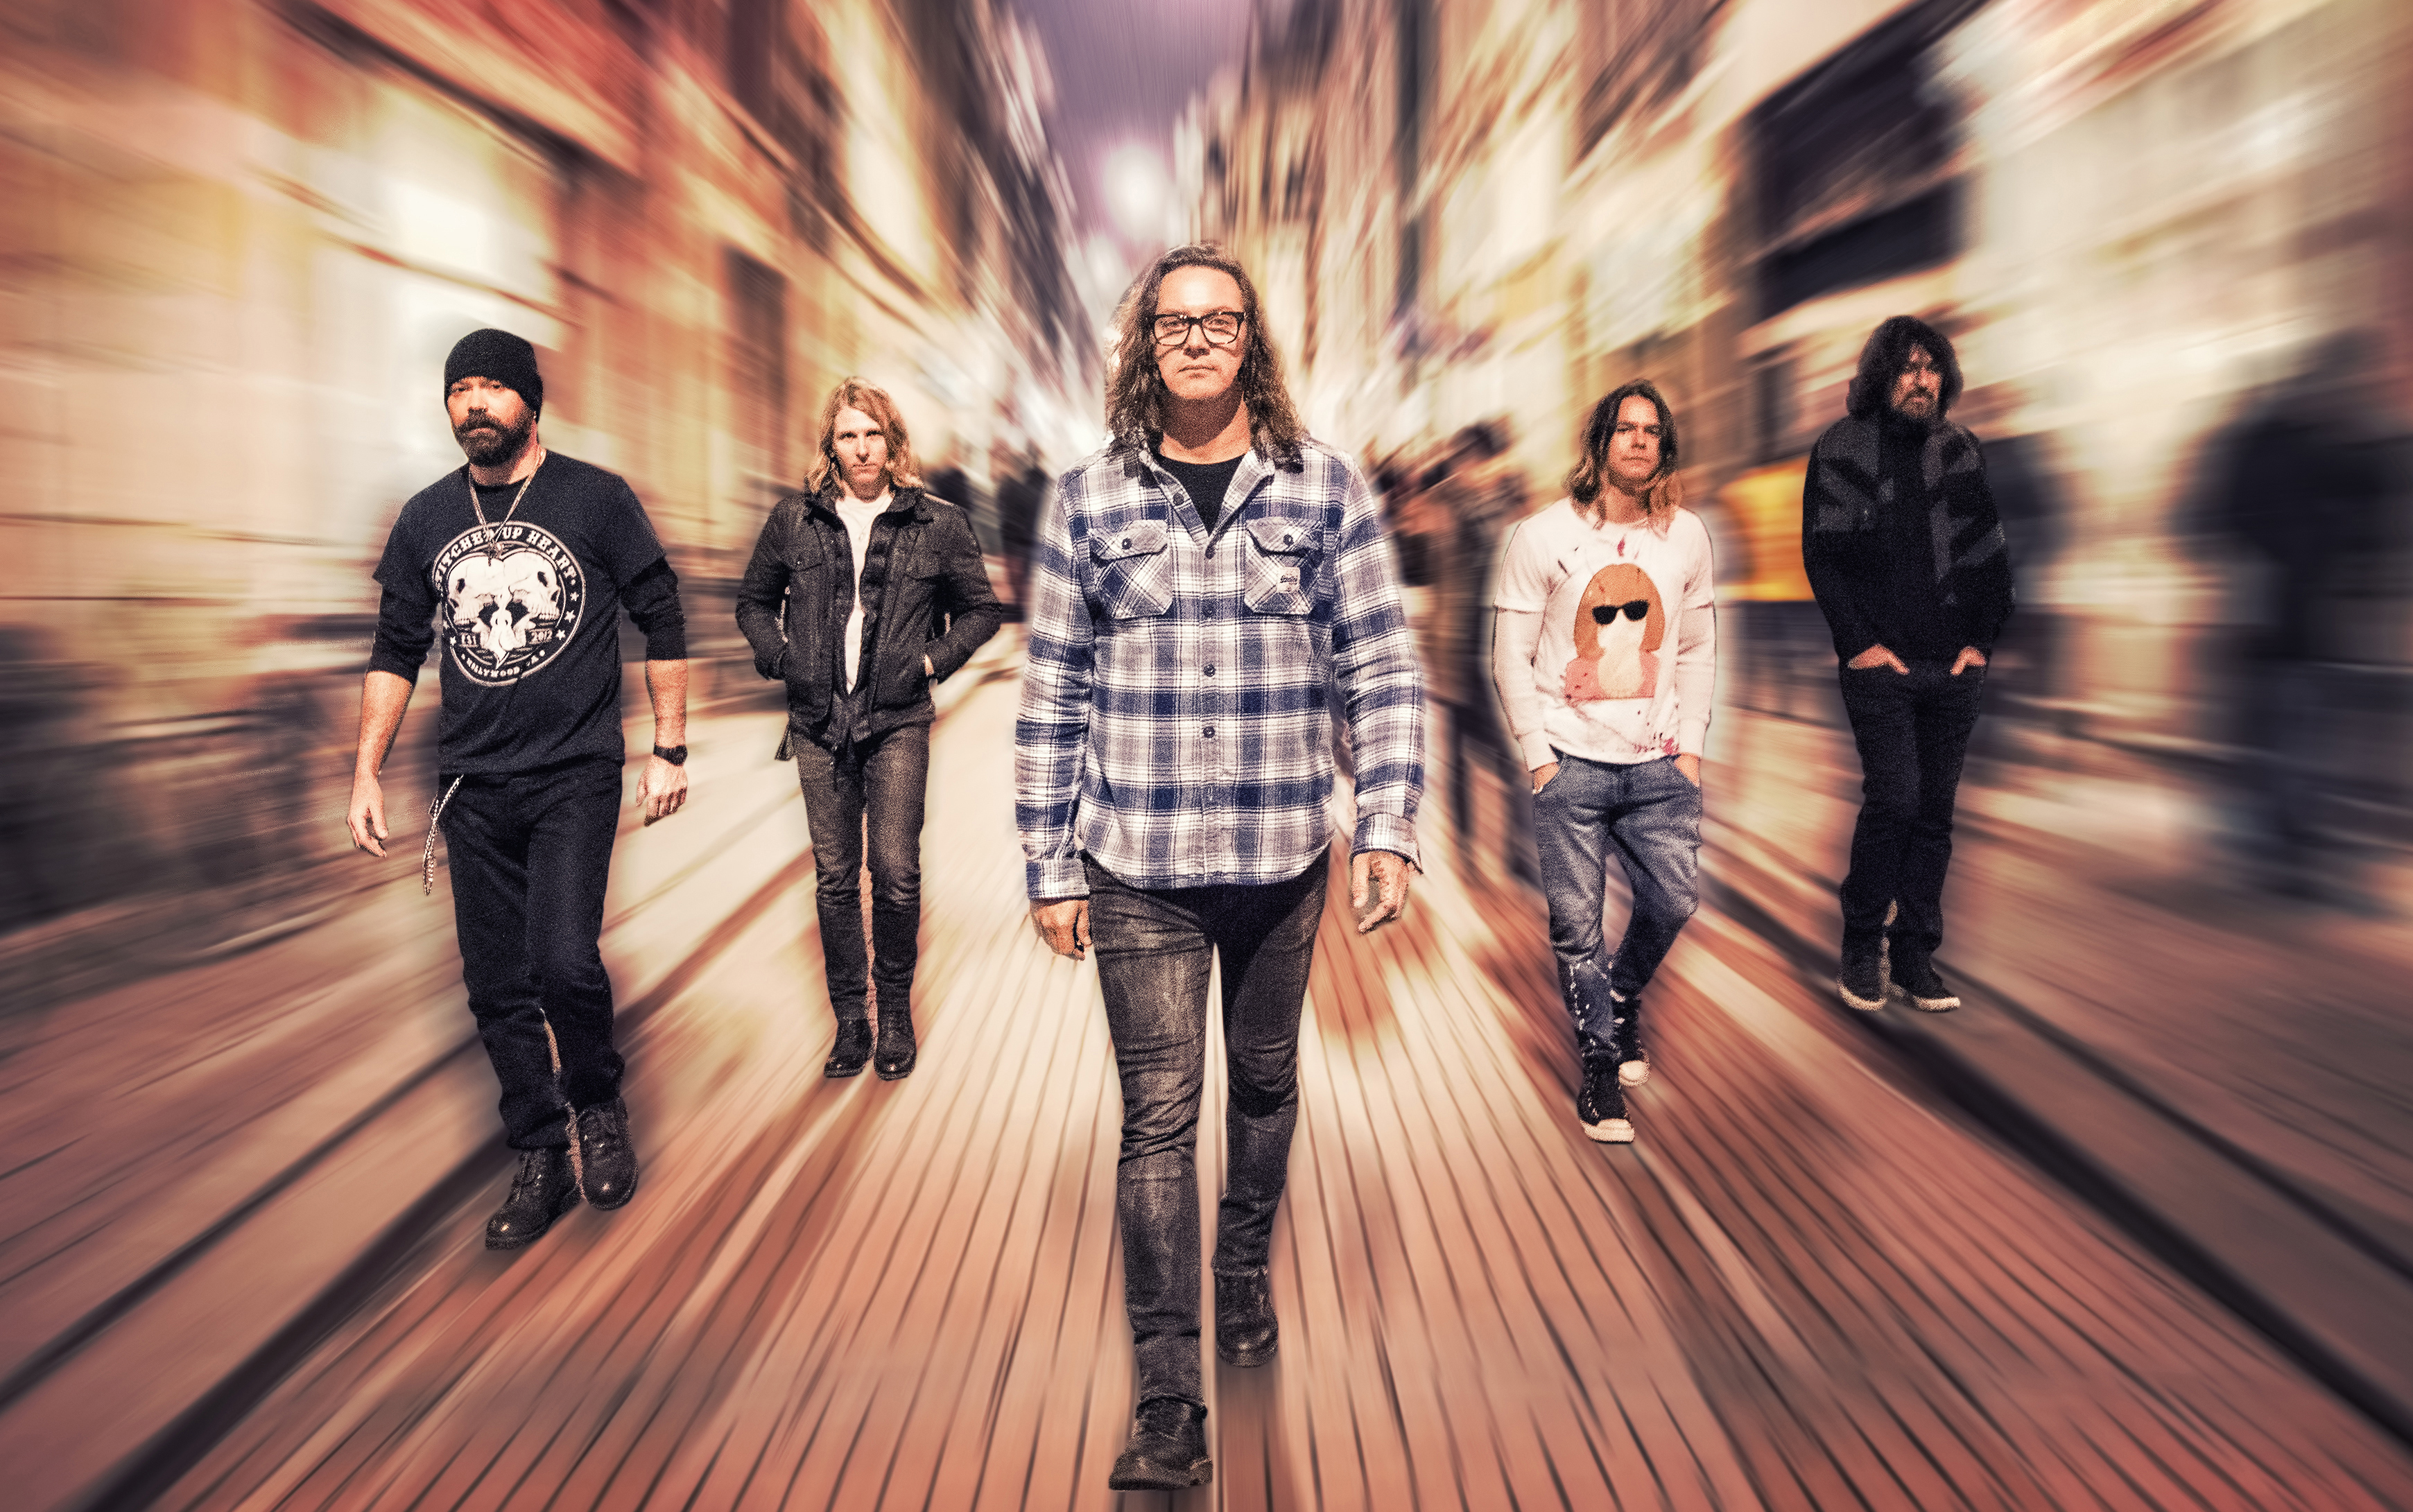 Candlebox Collabs with Peter Cornell on “Let Me Down Easy”, New Record Slated for 2021